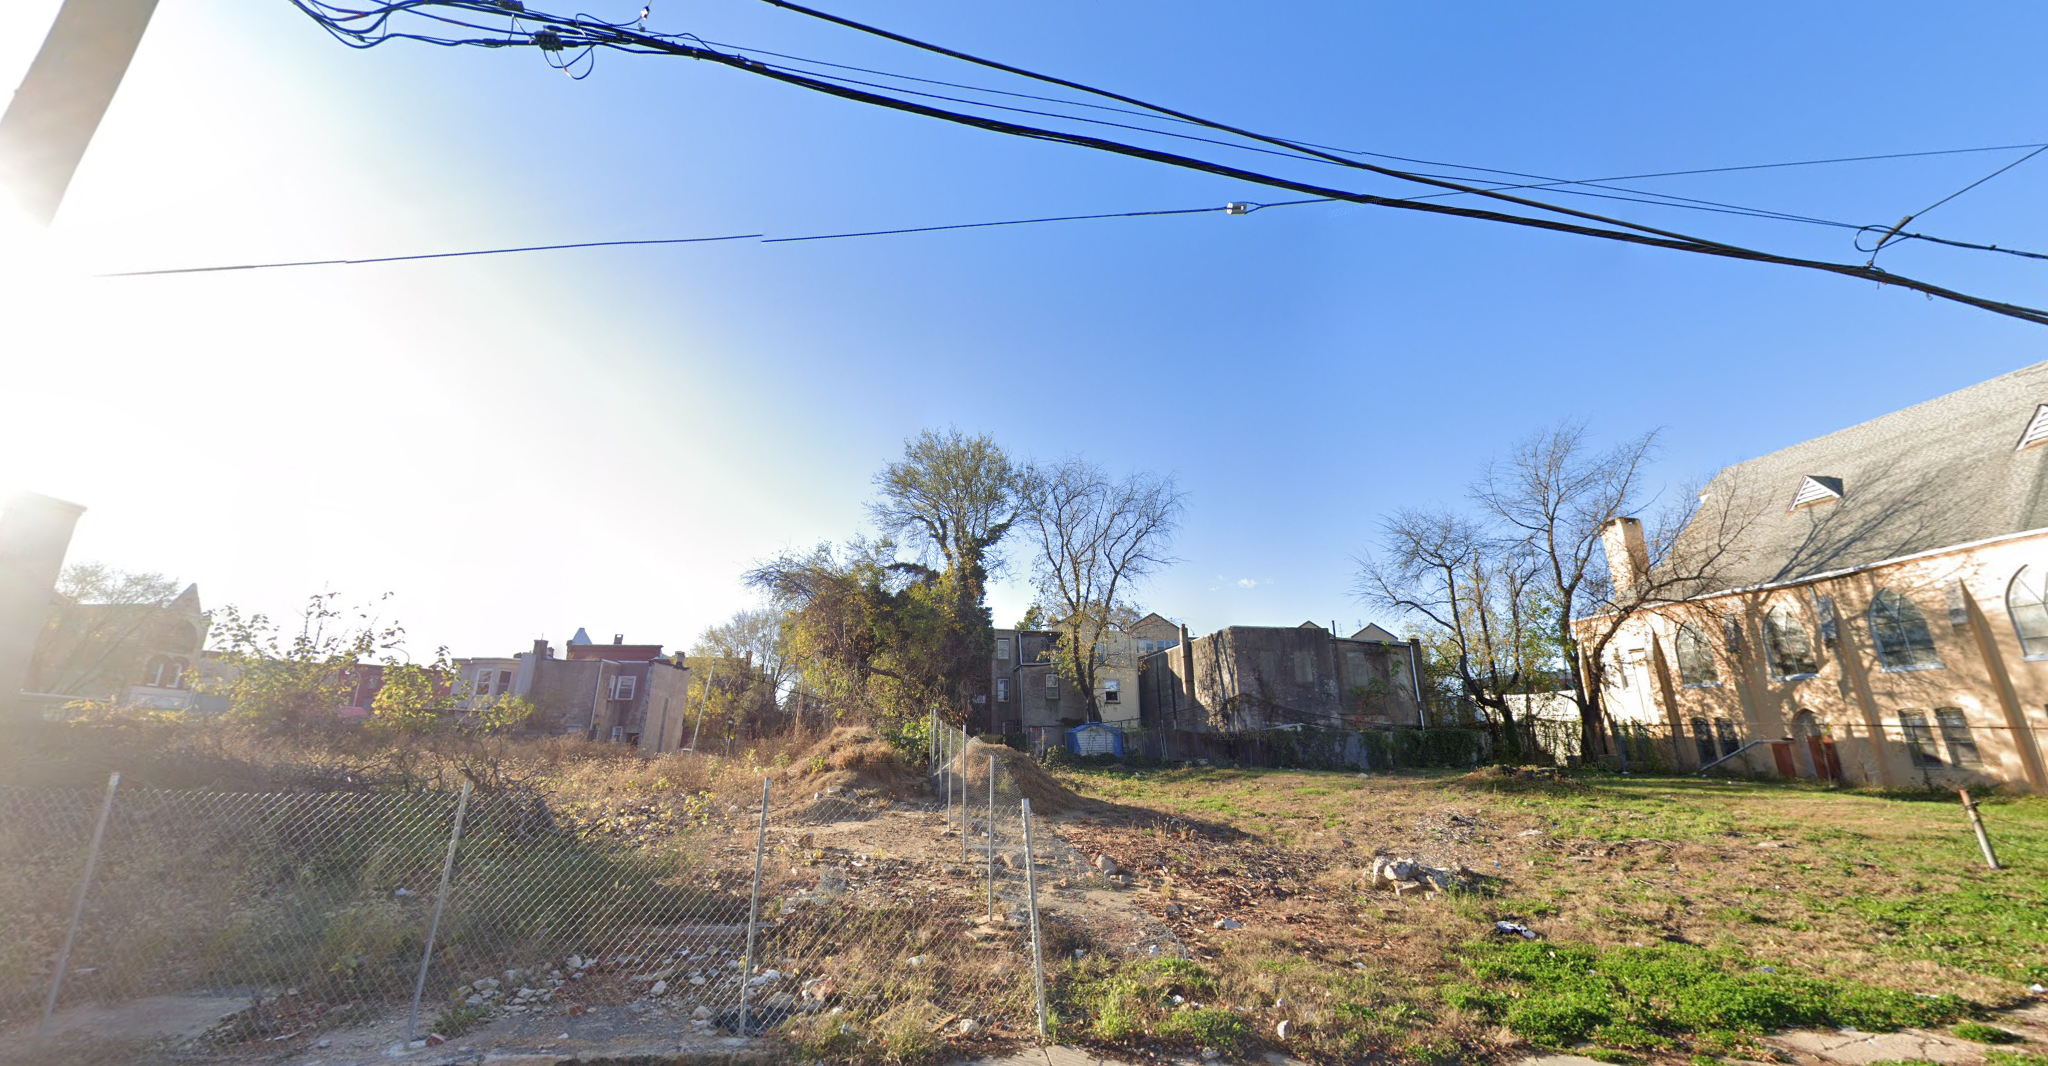 Current view of 1714 North 22nd Street. Credit: Google.